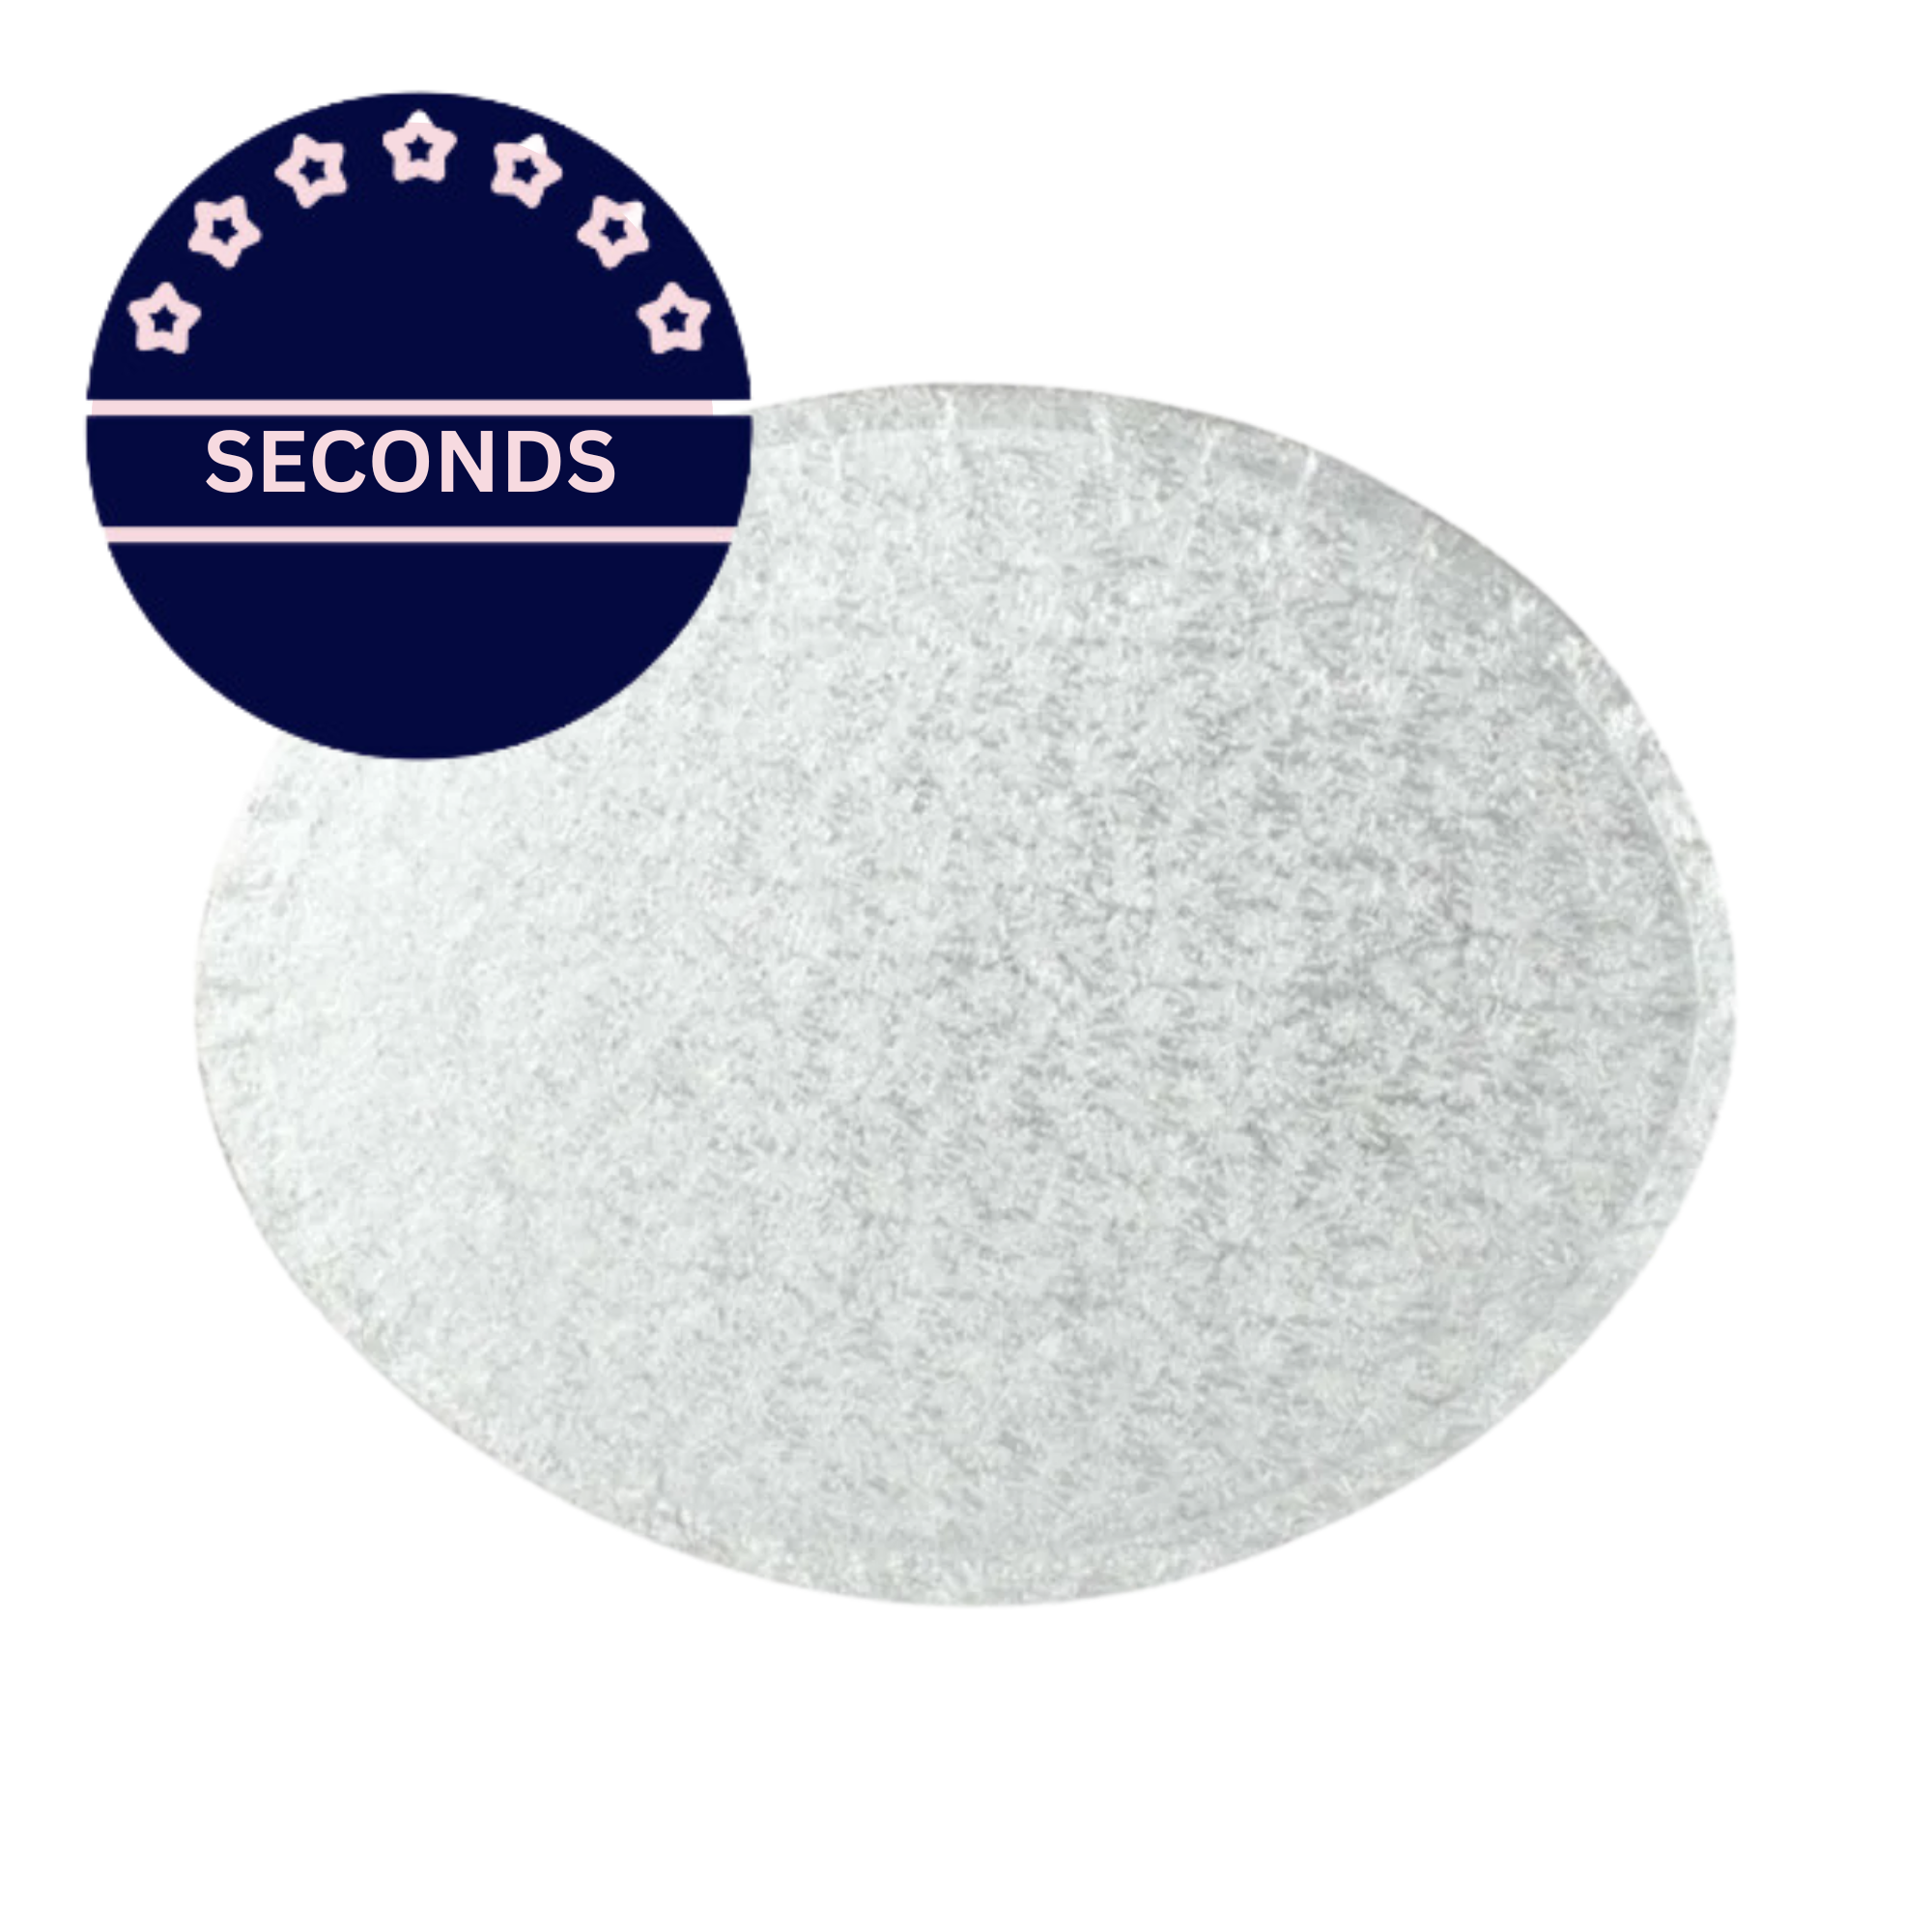 SECONDS - Oval Cake Drum 12mm Thick Cake Board - Silver - 15" x 13"